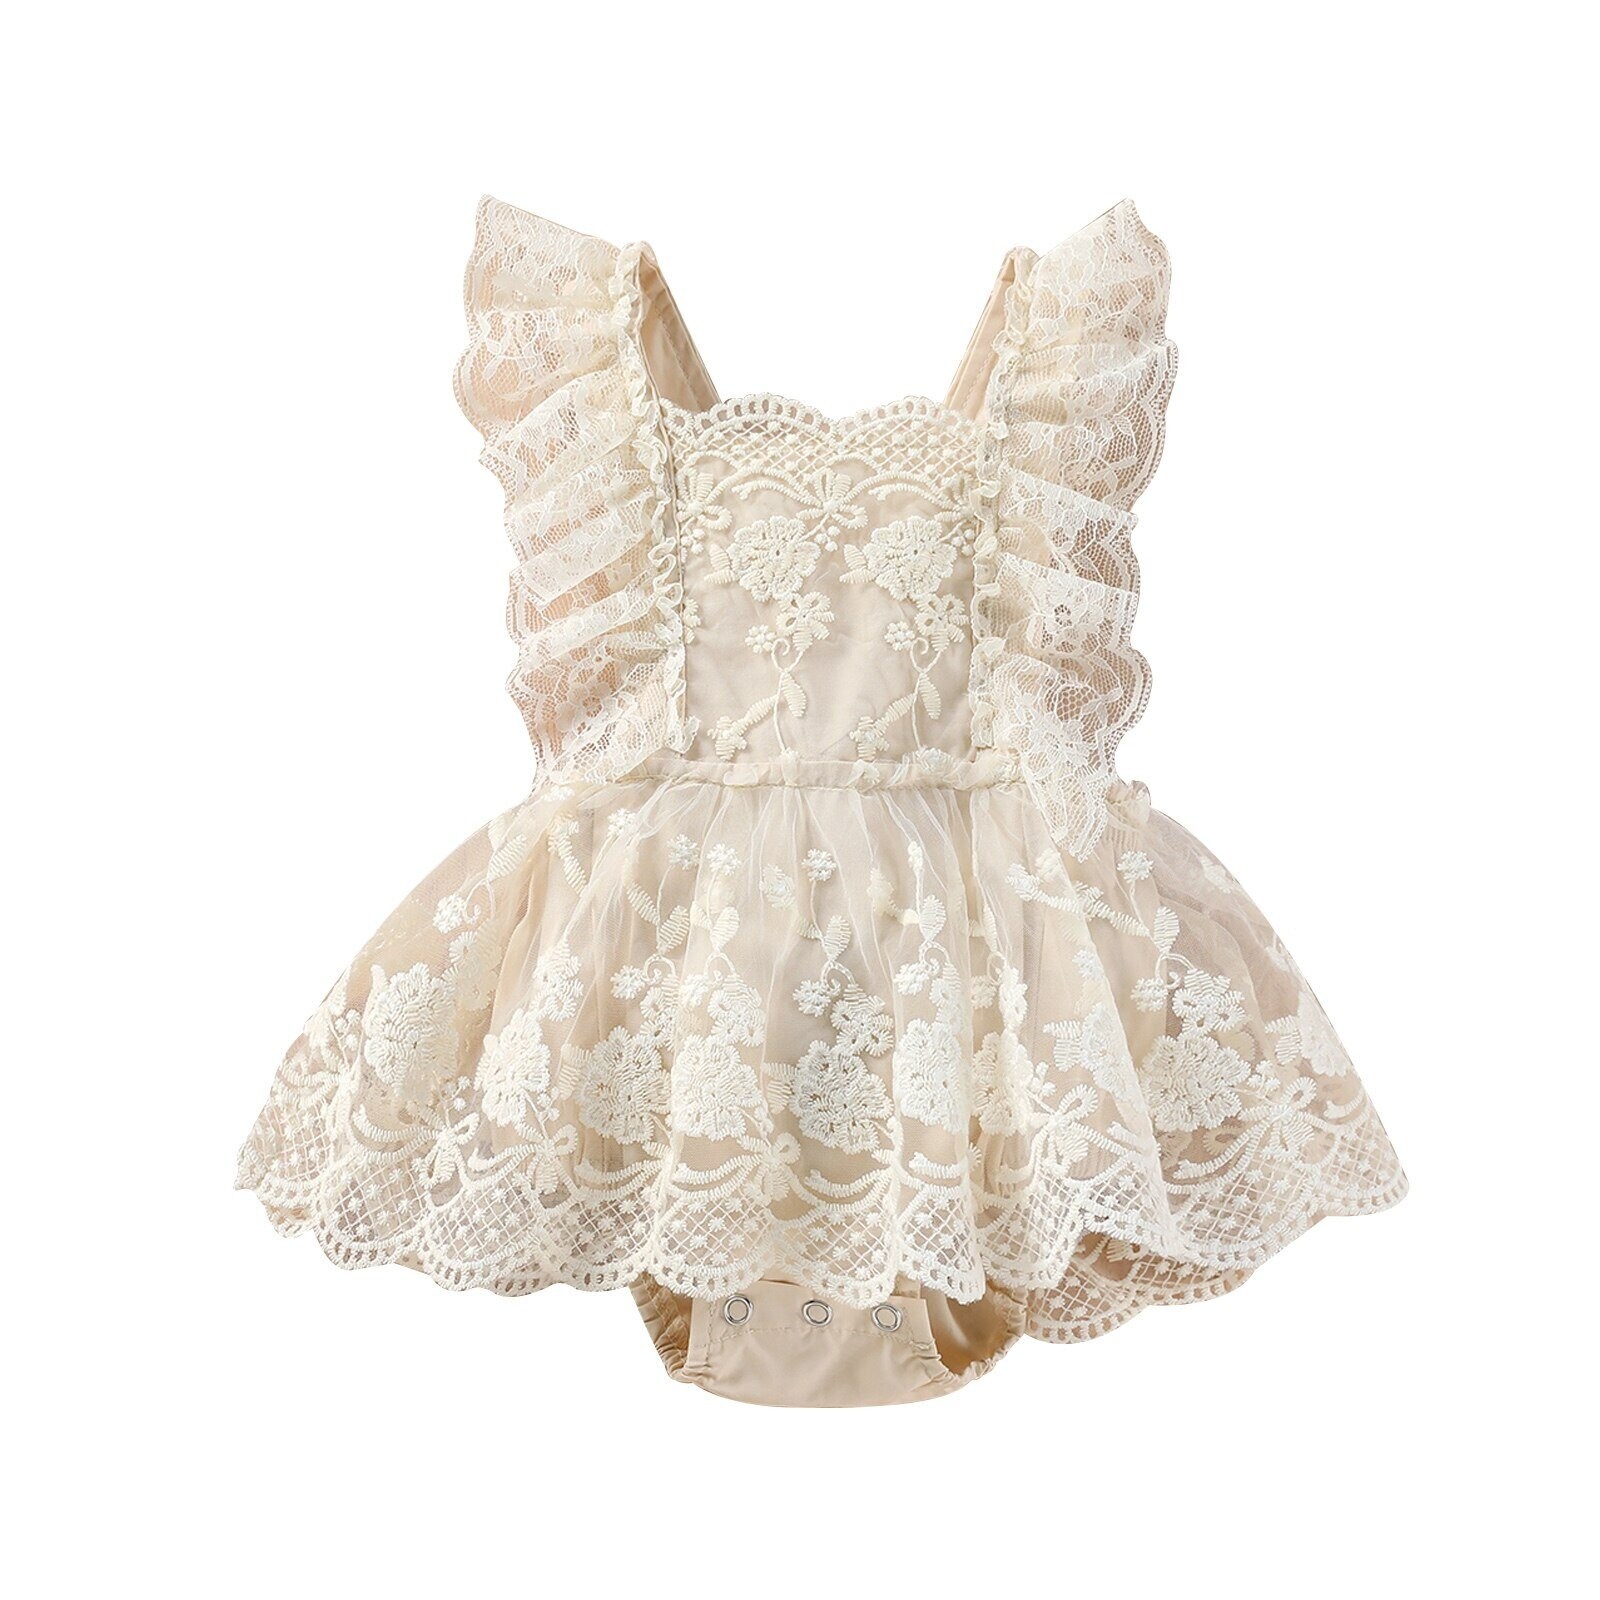 New Baby Girls Summer Romper Floral Lace Embroidery Romper Dress Straps Sleeveless Sweet Triangle Bottom Jumpsuit